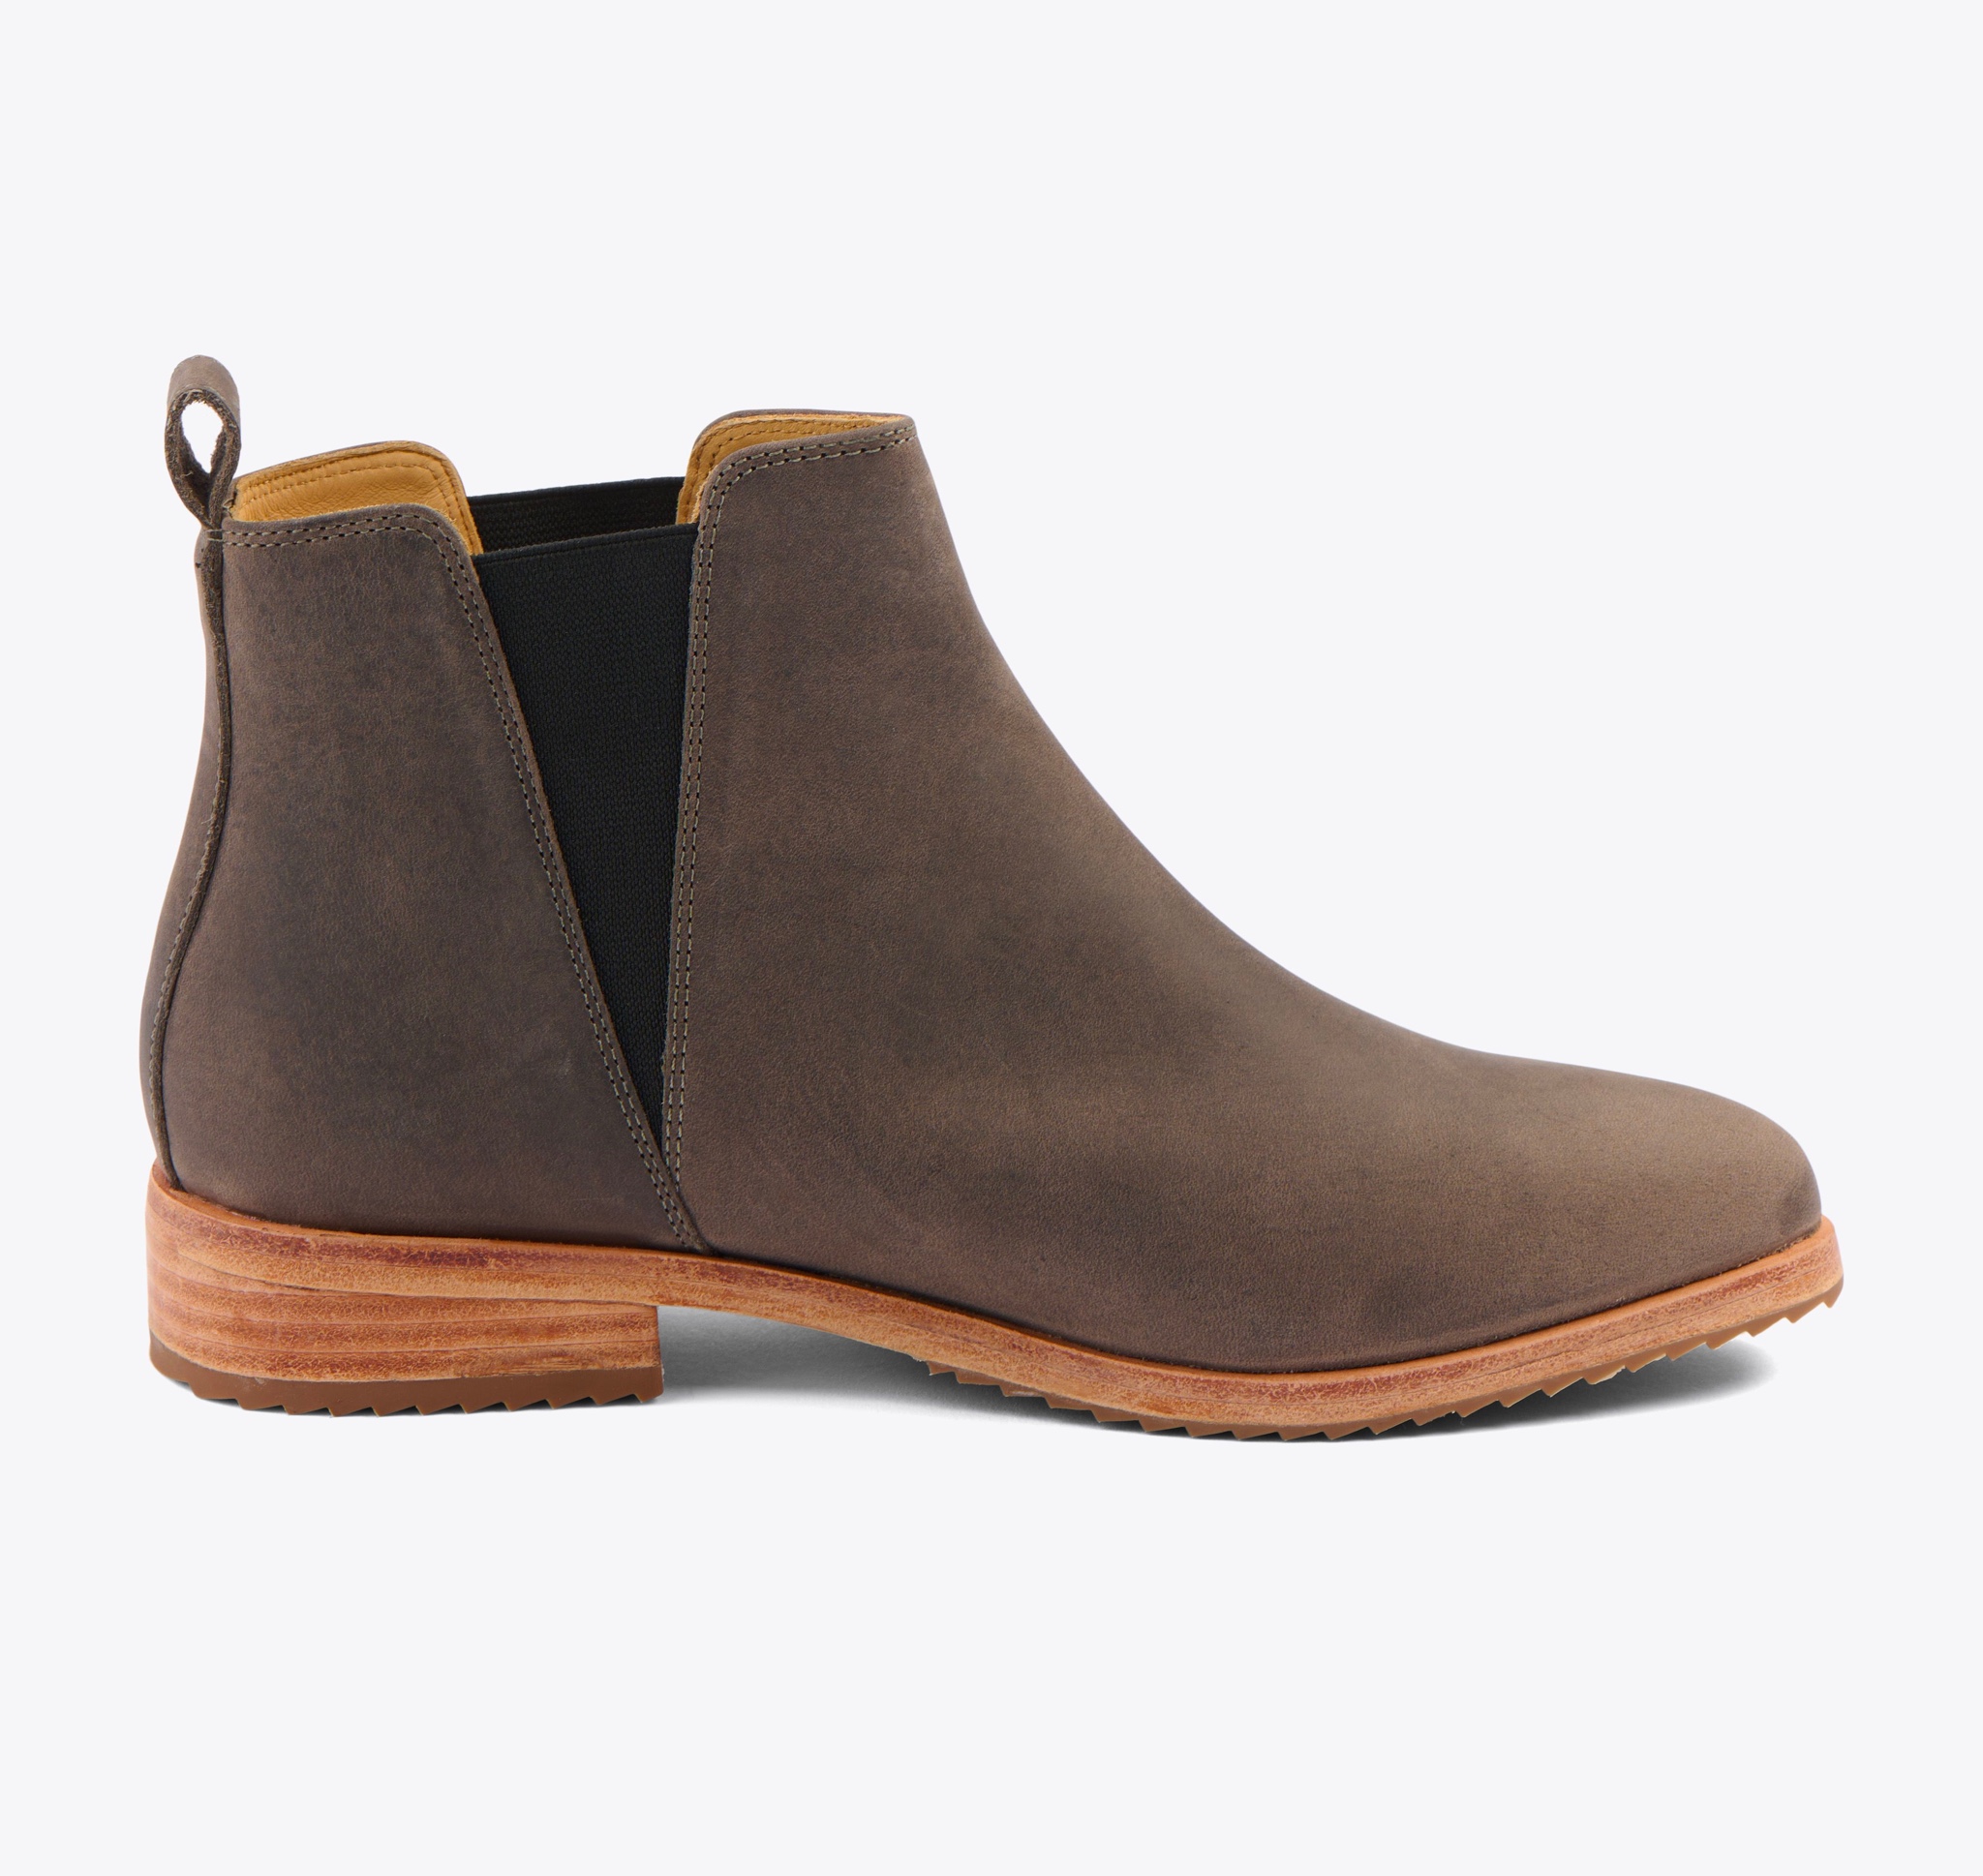 Nisolo Everyday Chelsea Boot Grey - Every Nisolo product is built on the foundation of comfort, function, and design. 